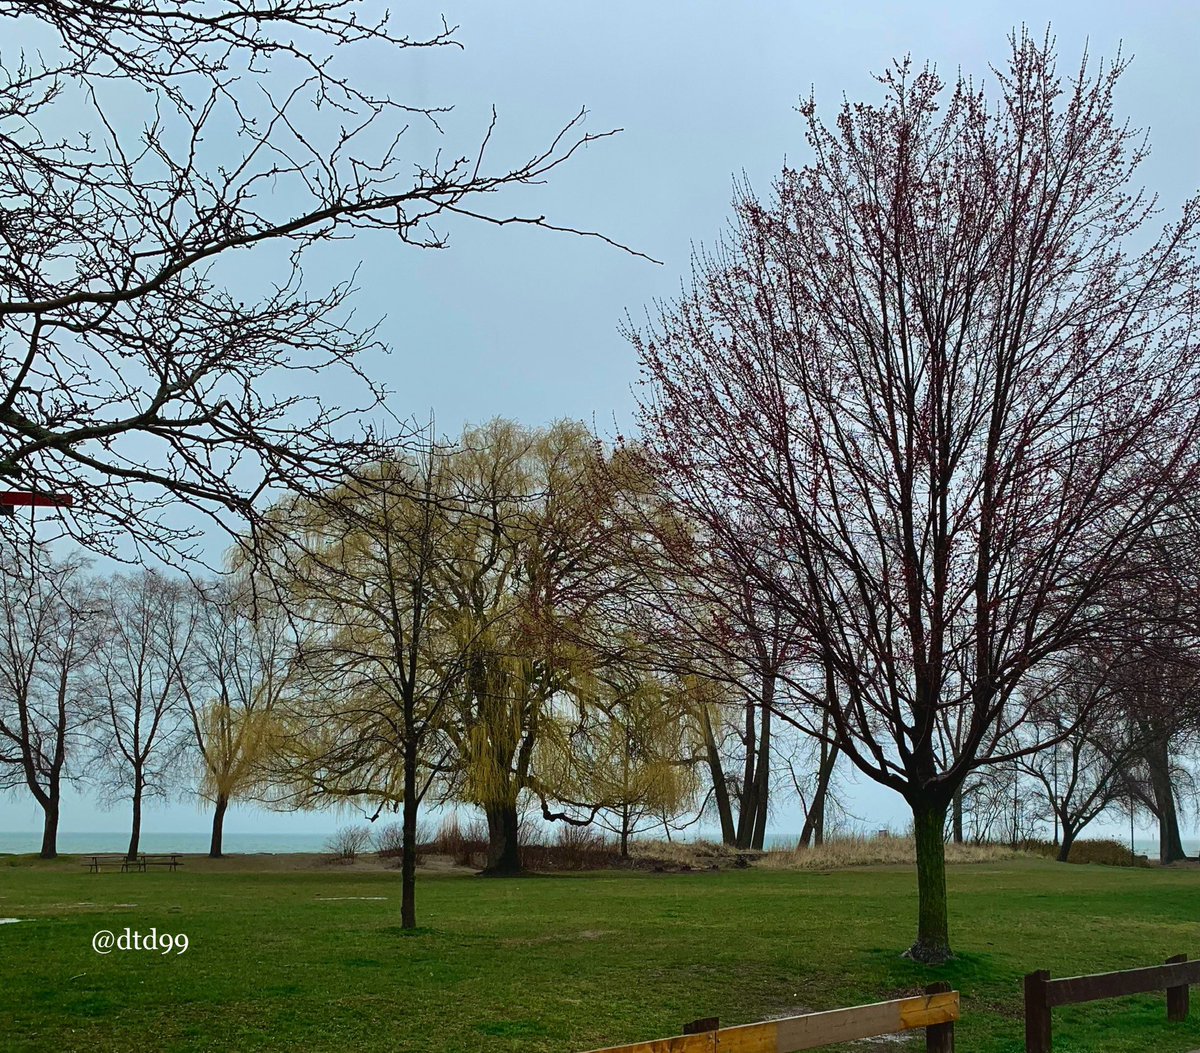 #AlphabetChallenge #WeekO for Lake Ontario, which is just beyond the #trees. Taken last week in St. Catharines, Ontario on an overcast and rainy day. #photography #mobilephotography #landscapephotography #RoadTrip